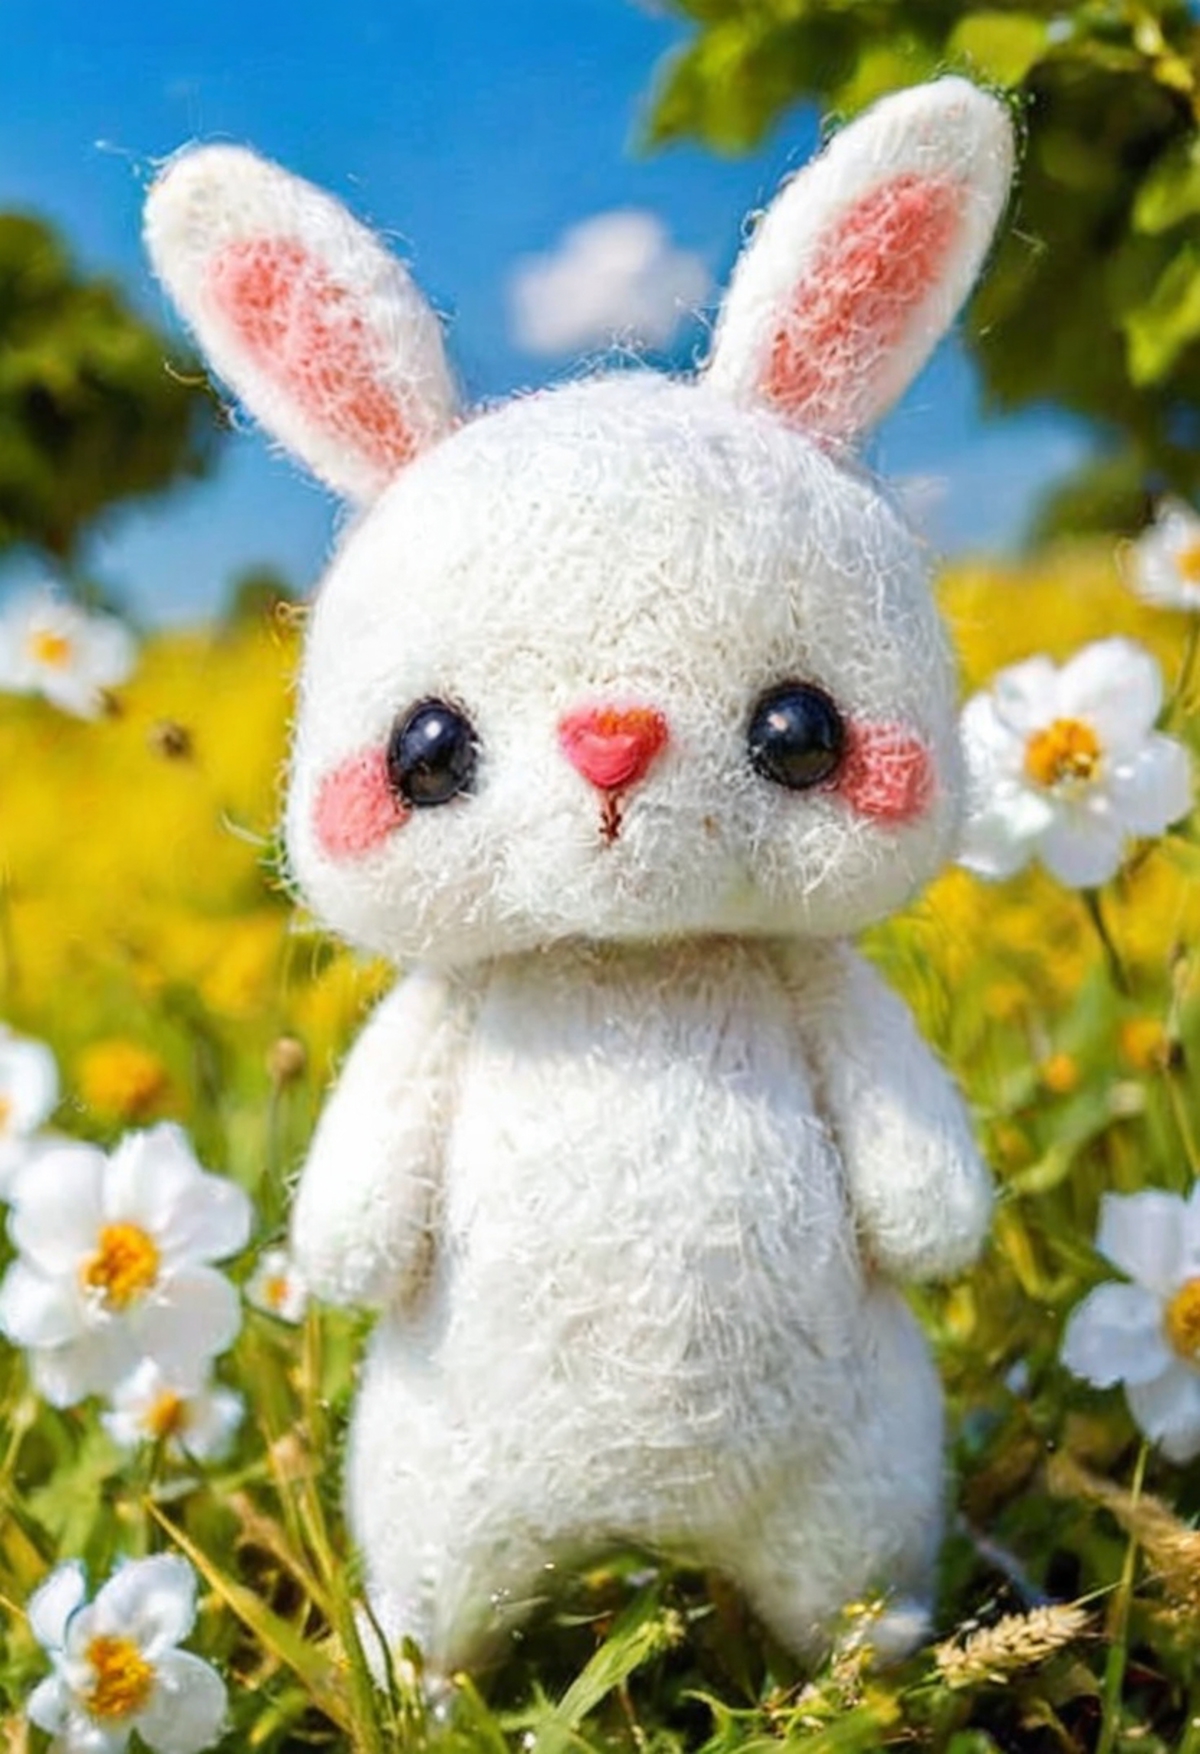 A white stuffed bunny in a field of white flowers.